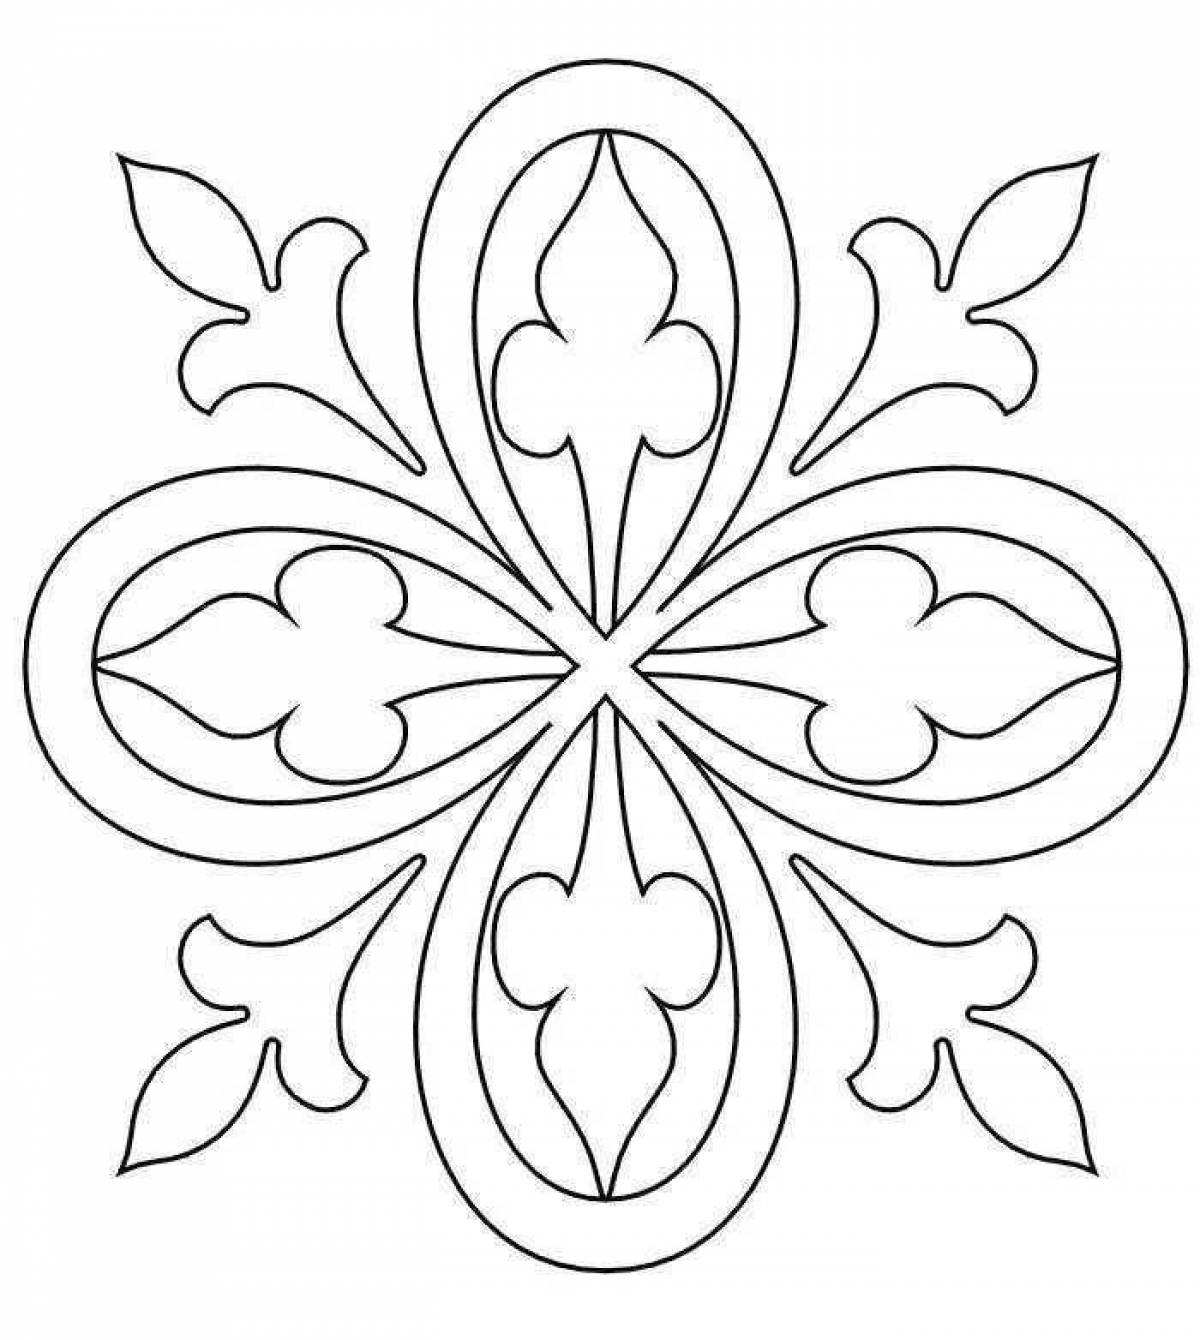 Color patterns and ornaments for coloring pages